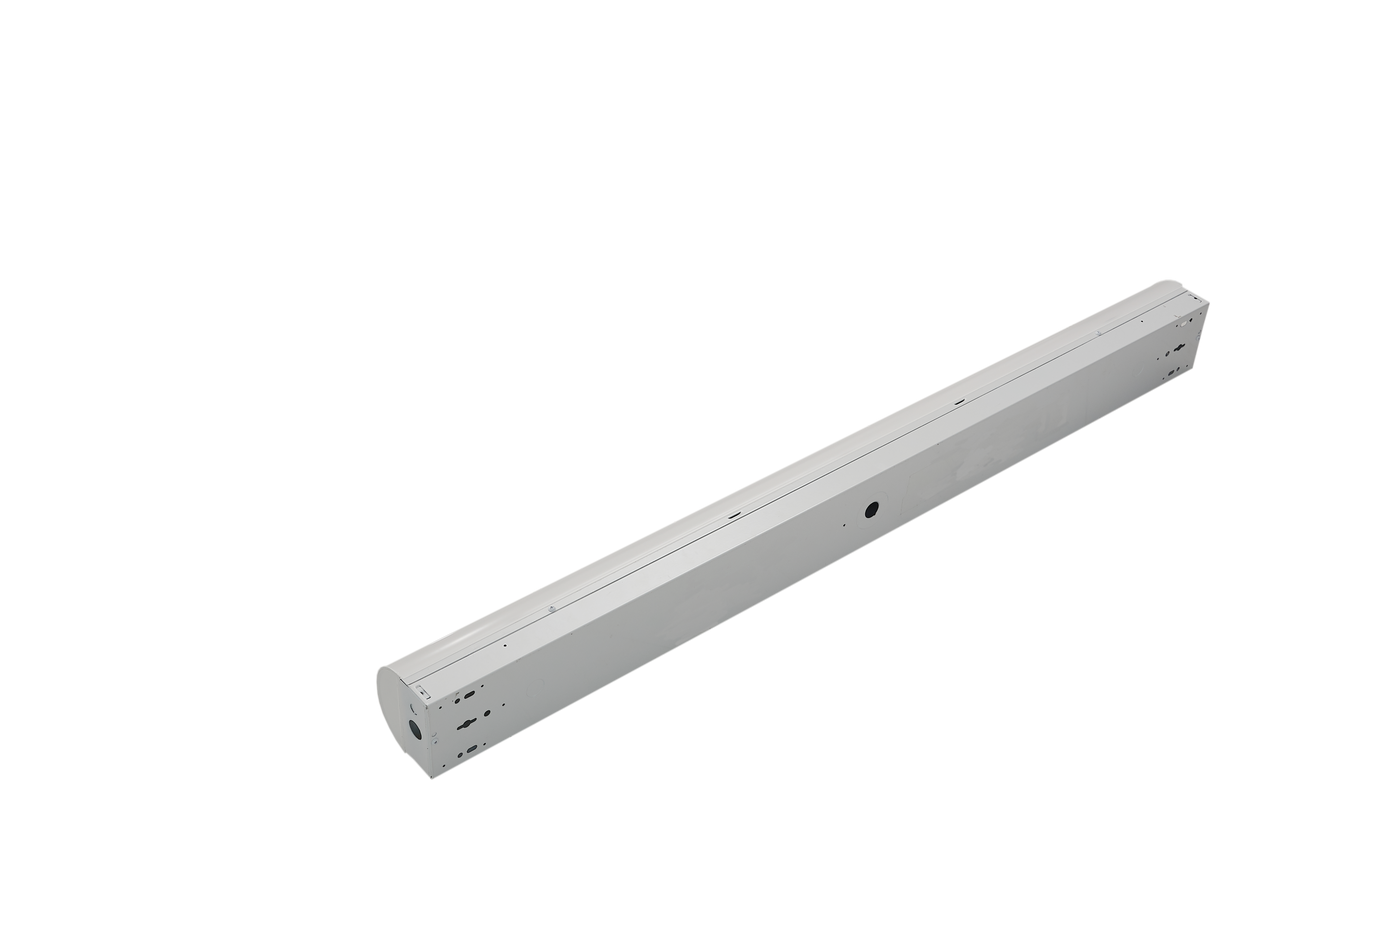 4' LED Linear Stairwell Light with Occupancy Dimming Sensor and Optional Emergency , 6000 Lumens, 30W/35W/45W Selectable, 120-277V, CCT Selectable 3500K/4000K/5000K, White Finish